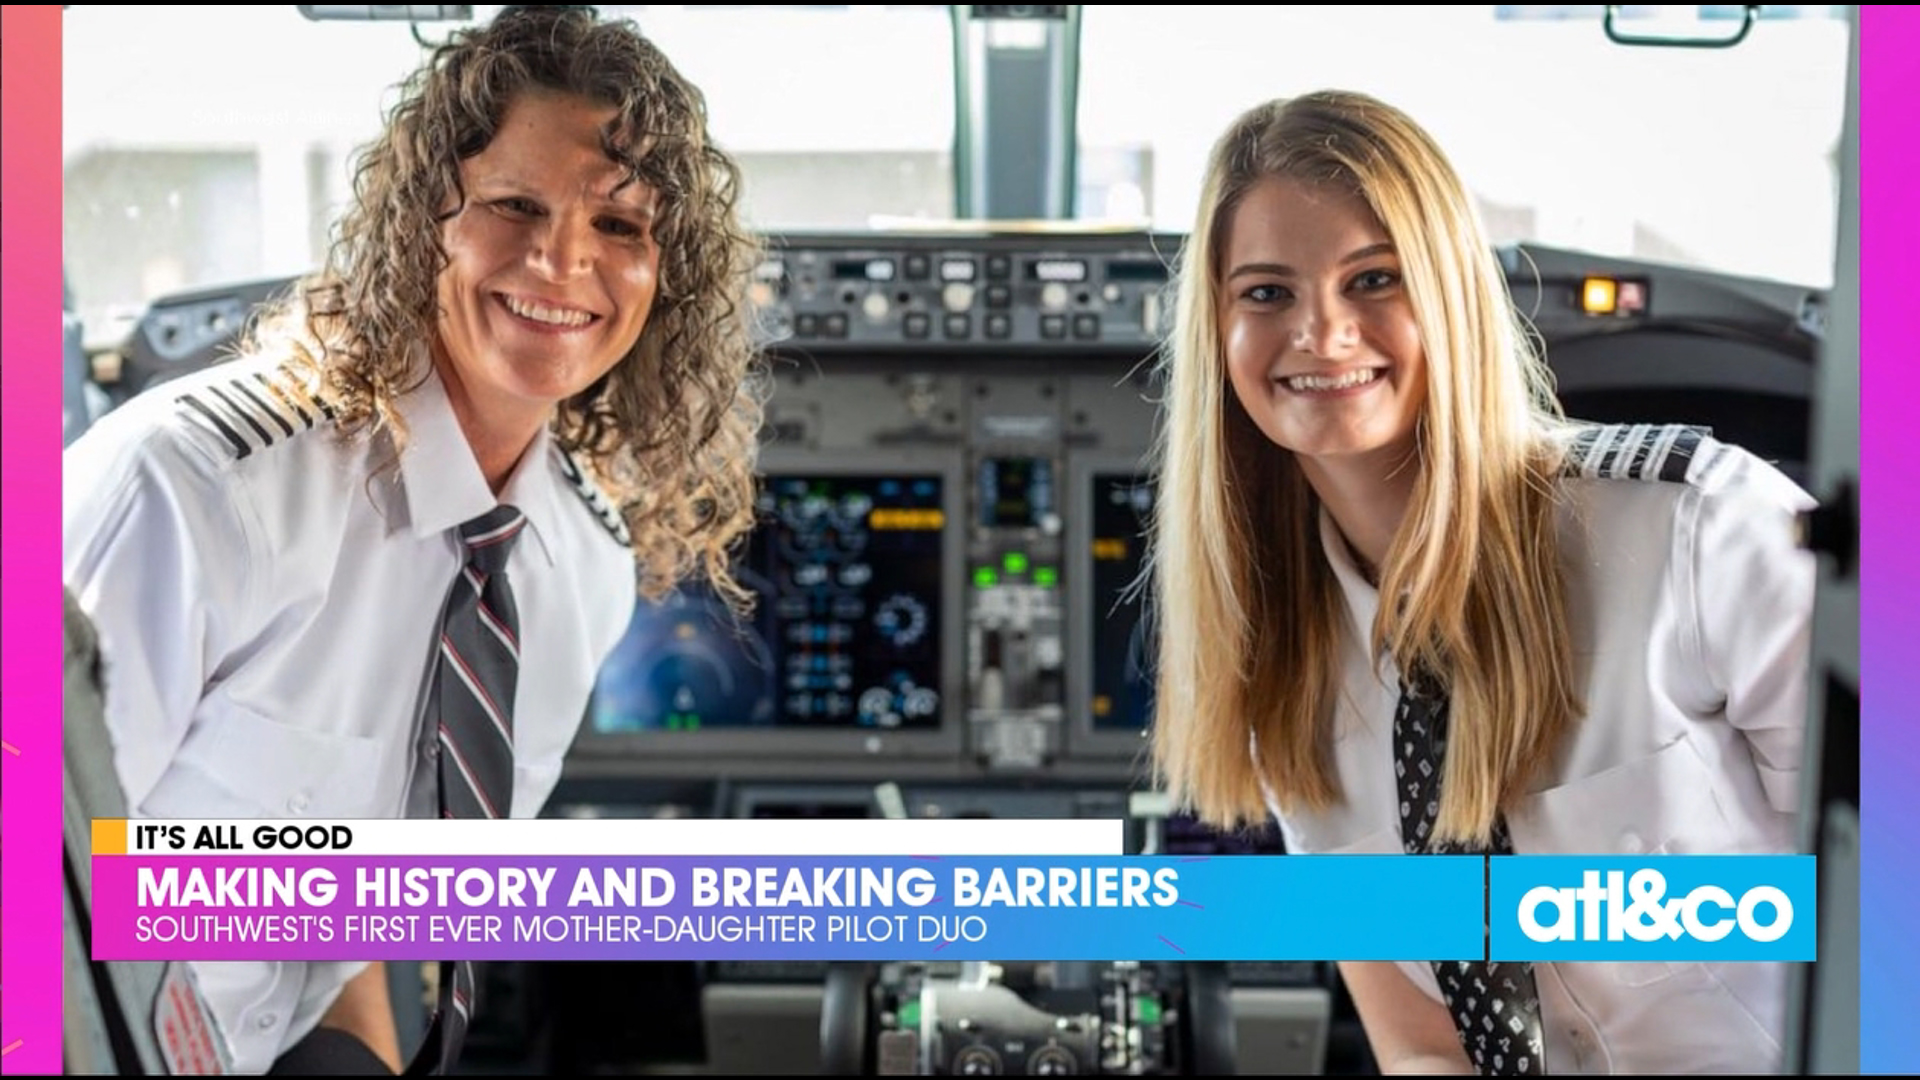 Meet the first mother-daughter pilot team in Southwest Airlines' 55-year history.